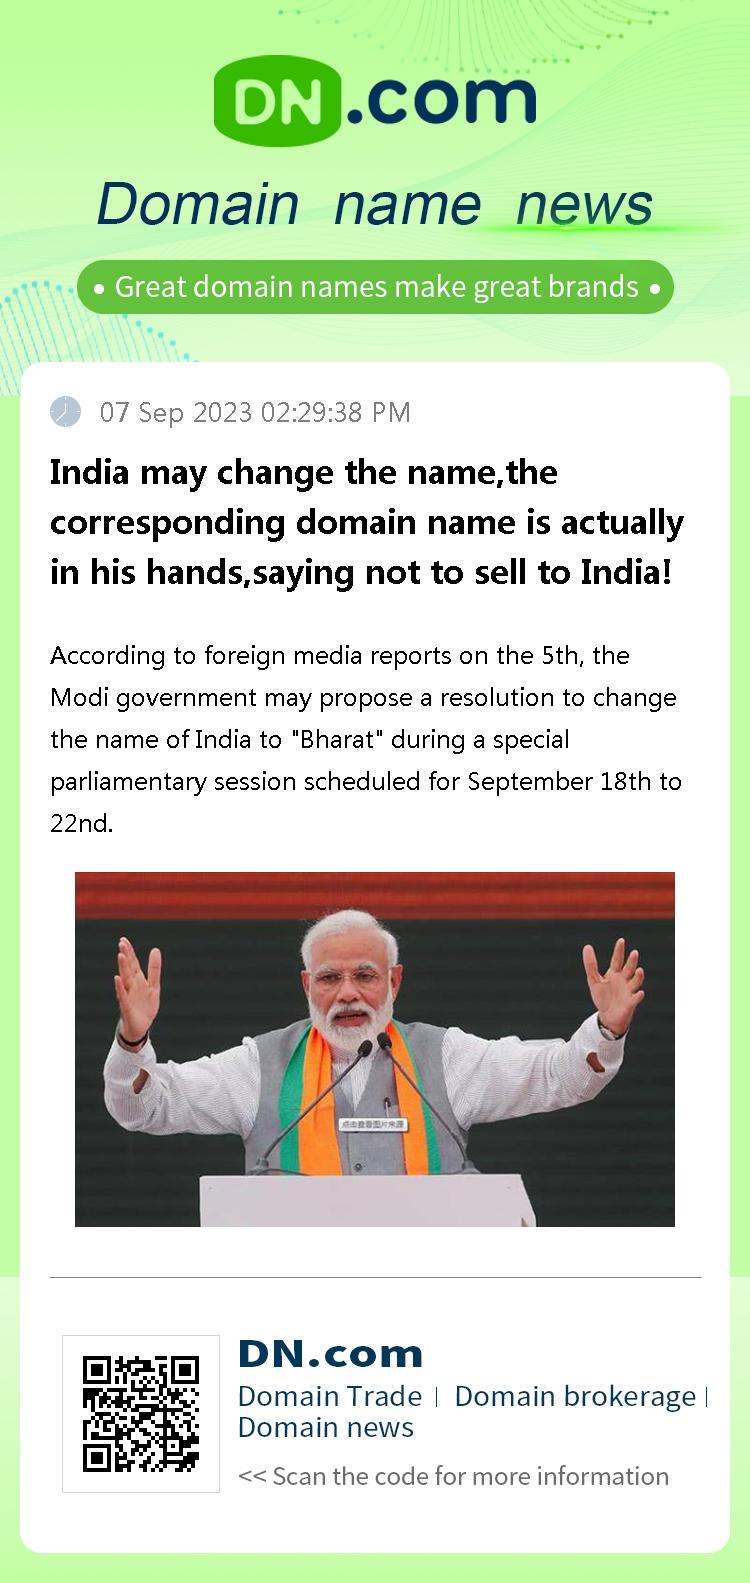 India may change the name,the corresponding domain name is actually in his hands,saying not to sell to India!